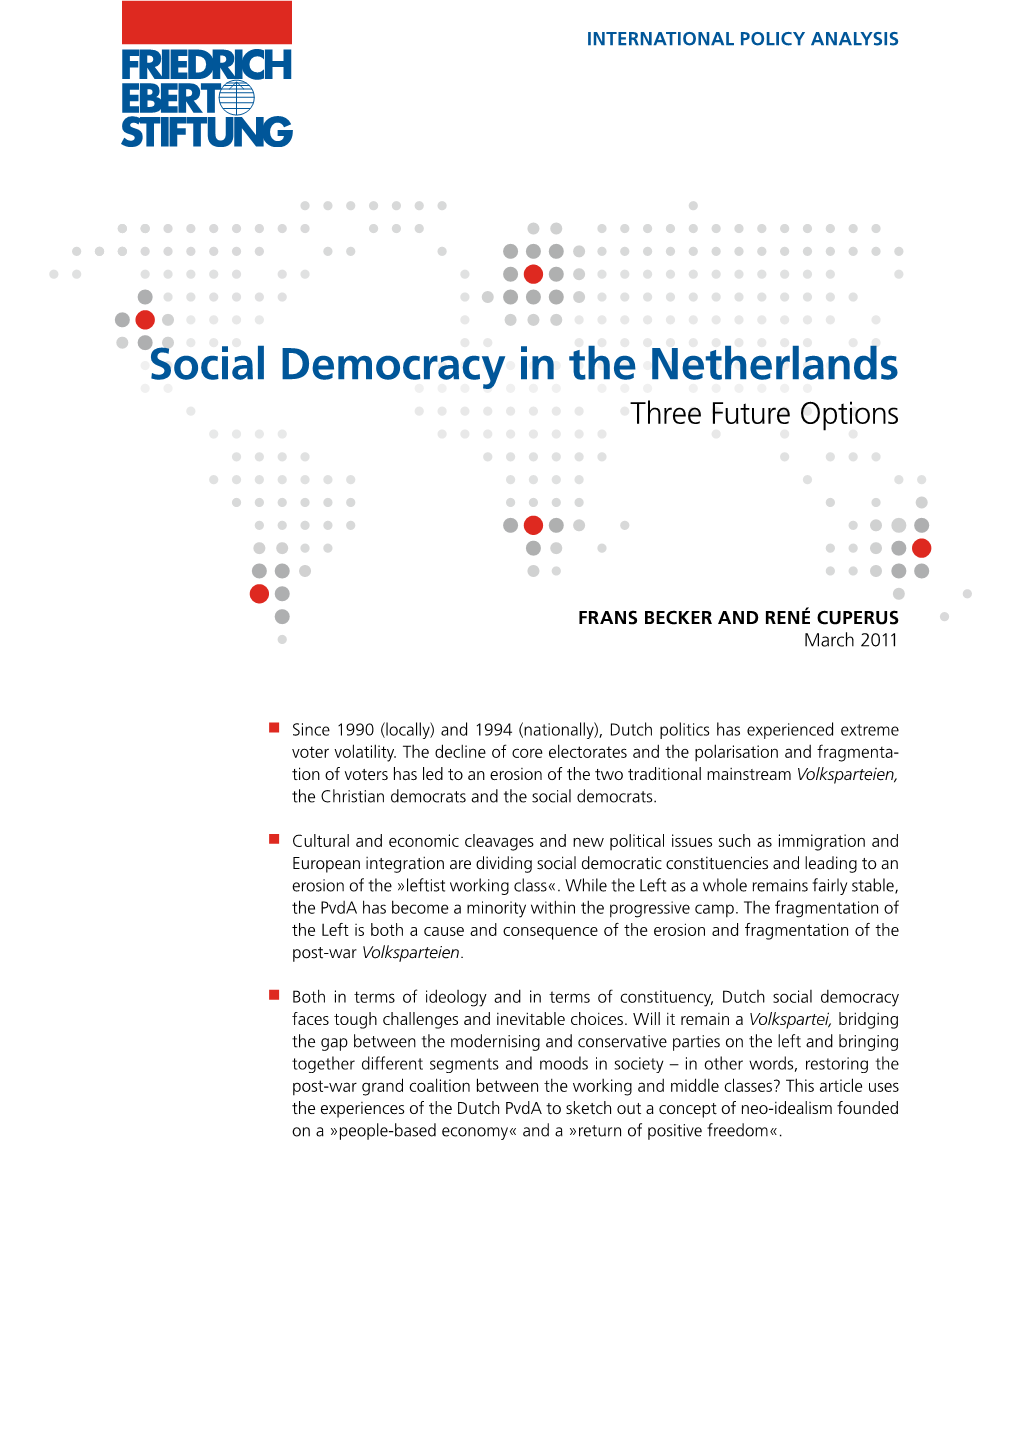 Social Democracy in the Netherlands Three Future Options